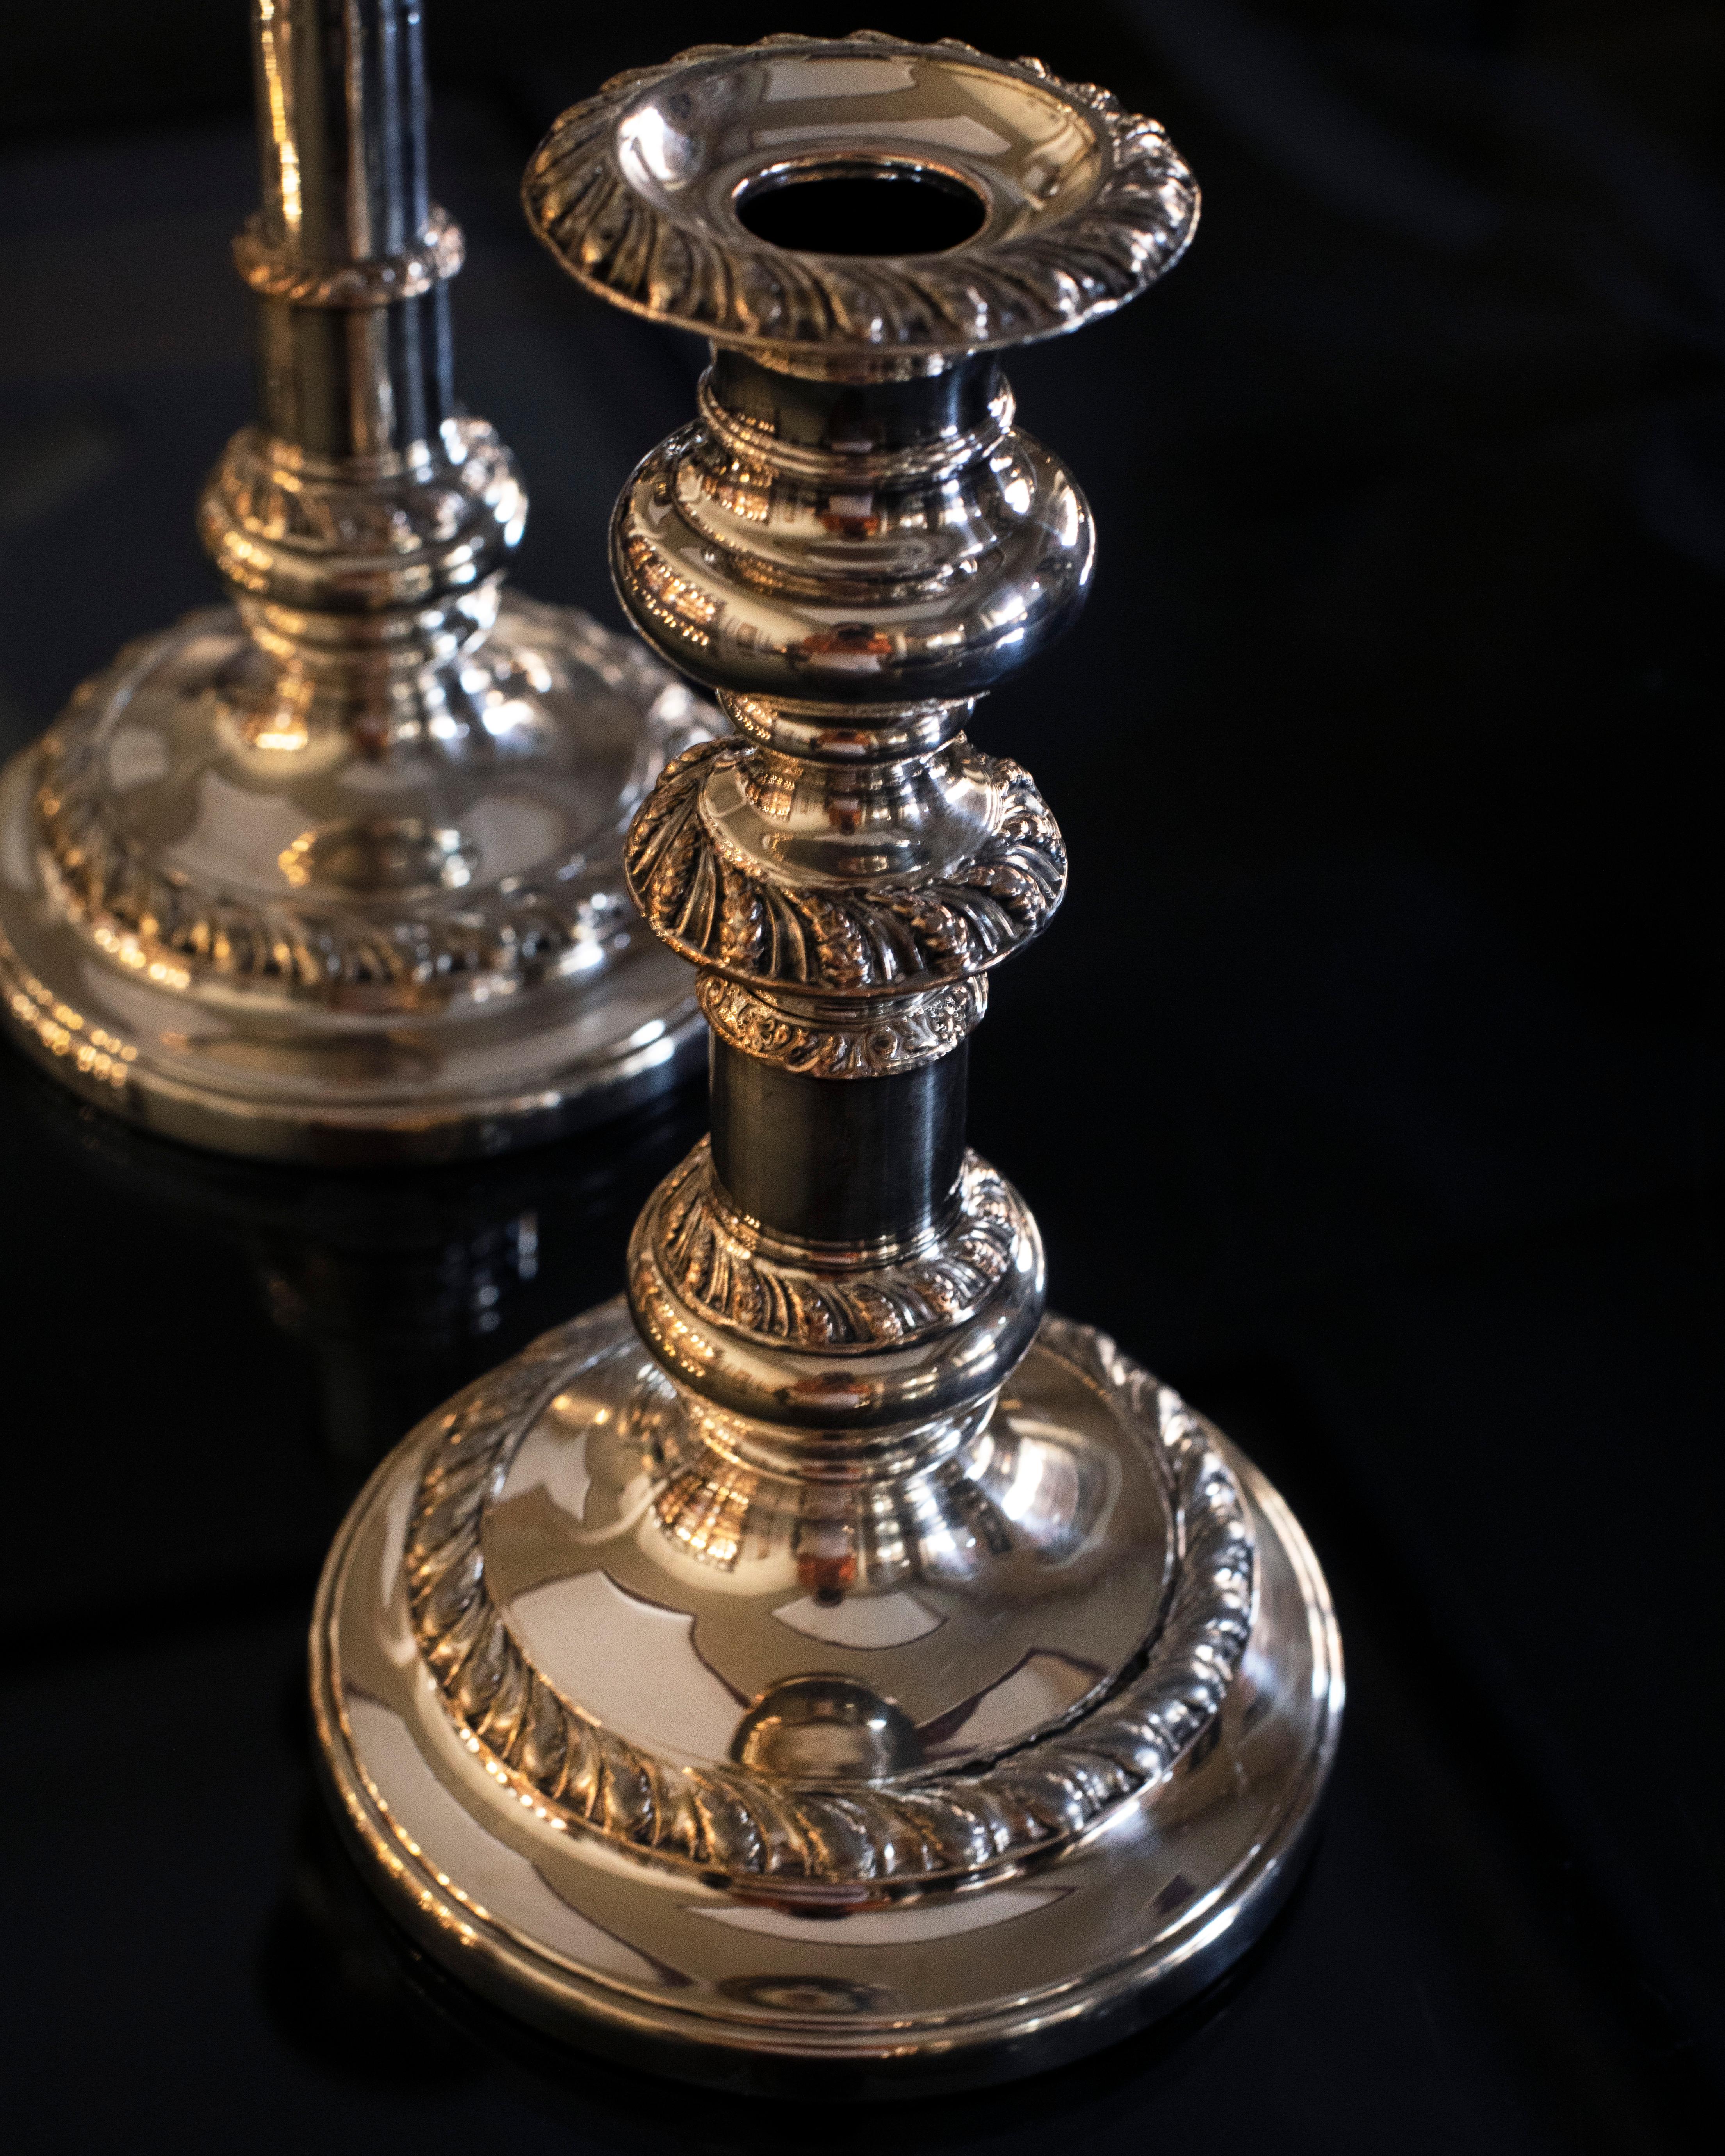 An English, old Sheffield decorative candle holders, dating to the late Victorian period, circa 1890. Appealing late Victorian pair with fine detail and elegant craftsmanship. The unique mechanism, also known as 